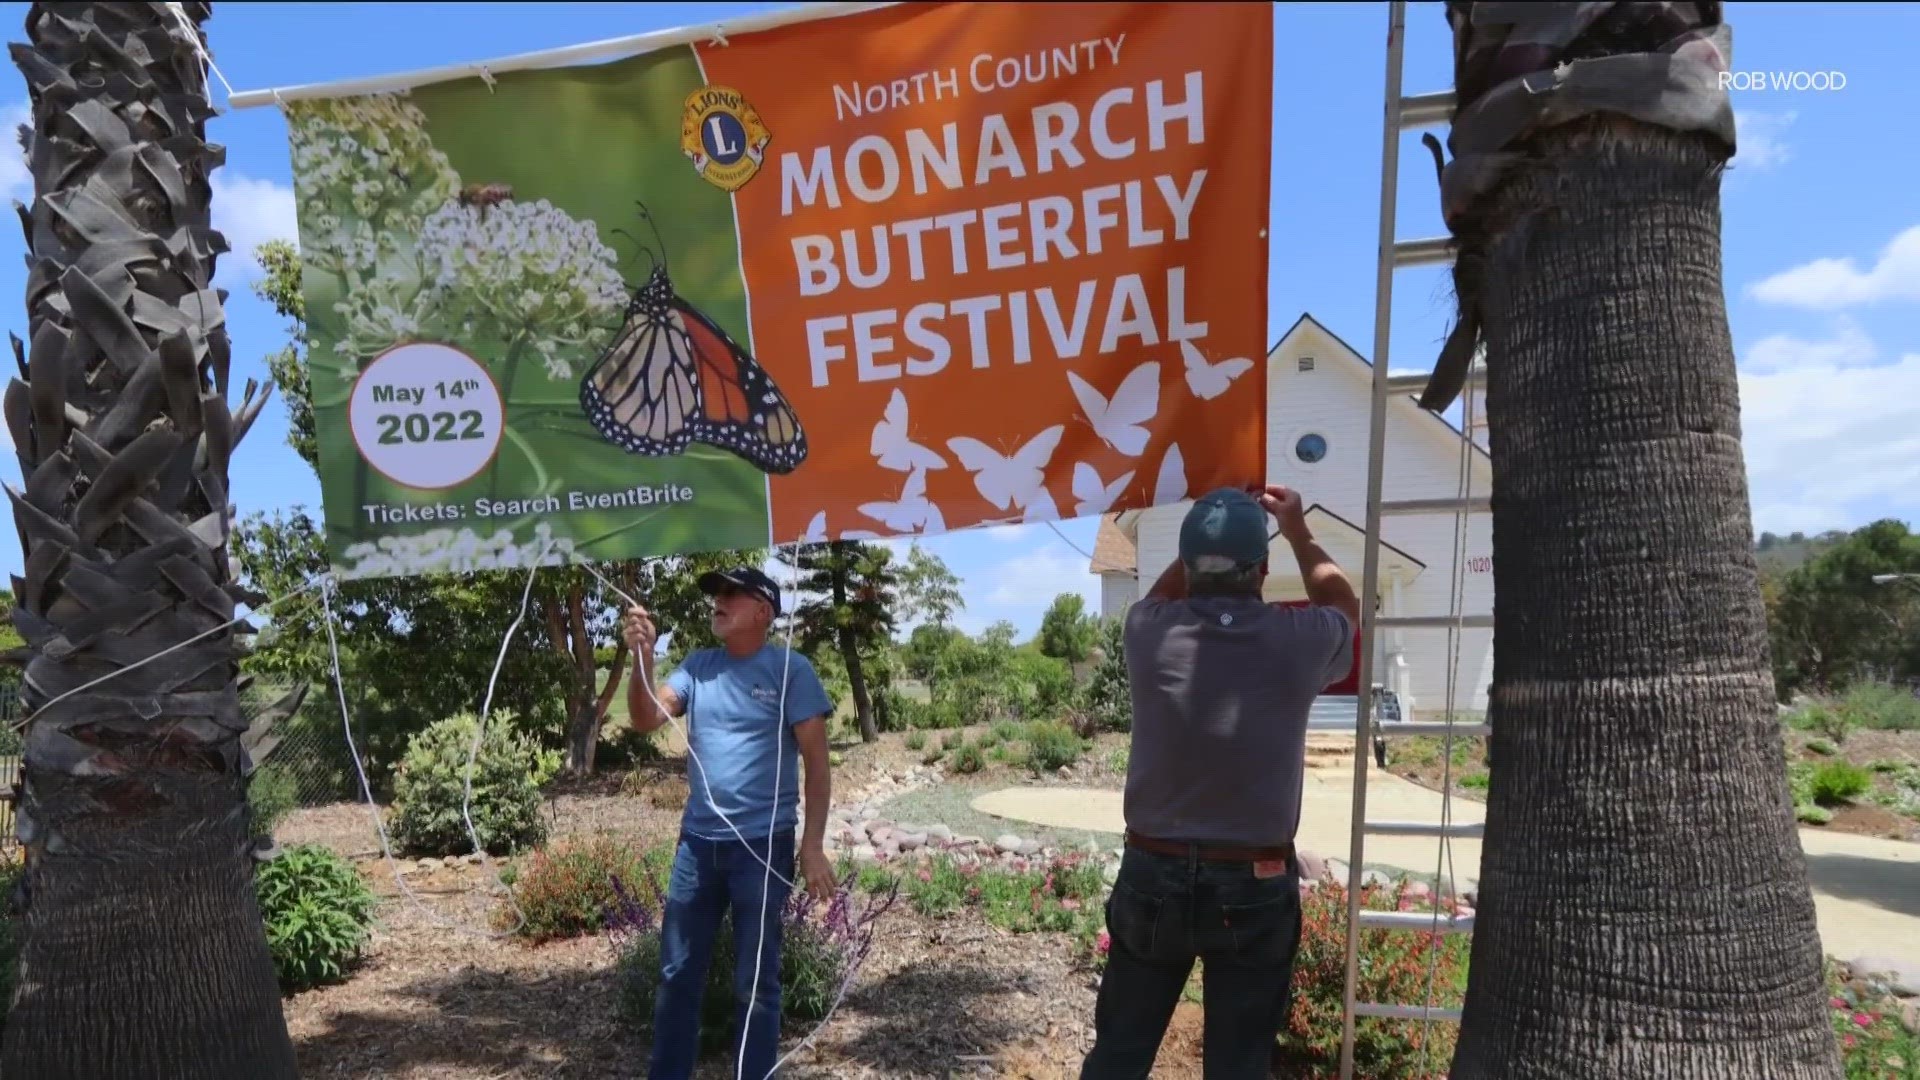 Spring has finally arrived, as well as Monarch butterflies. Now in its second year, residents are holding a Monarch Butterfly Festival in San Marcos this Saturday